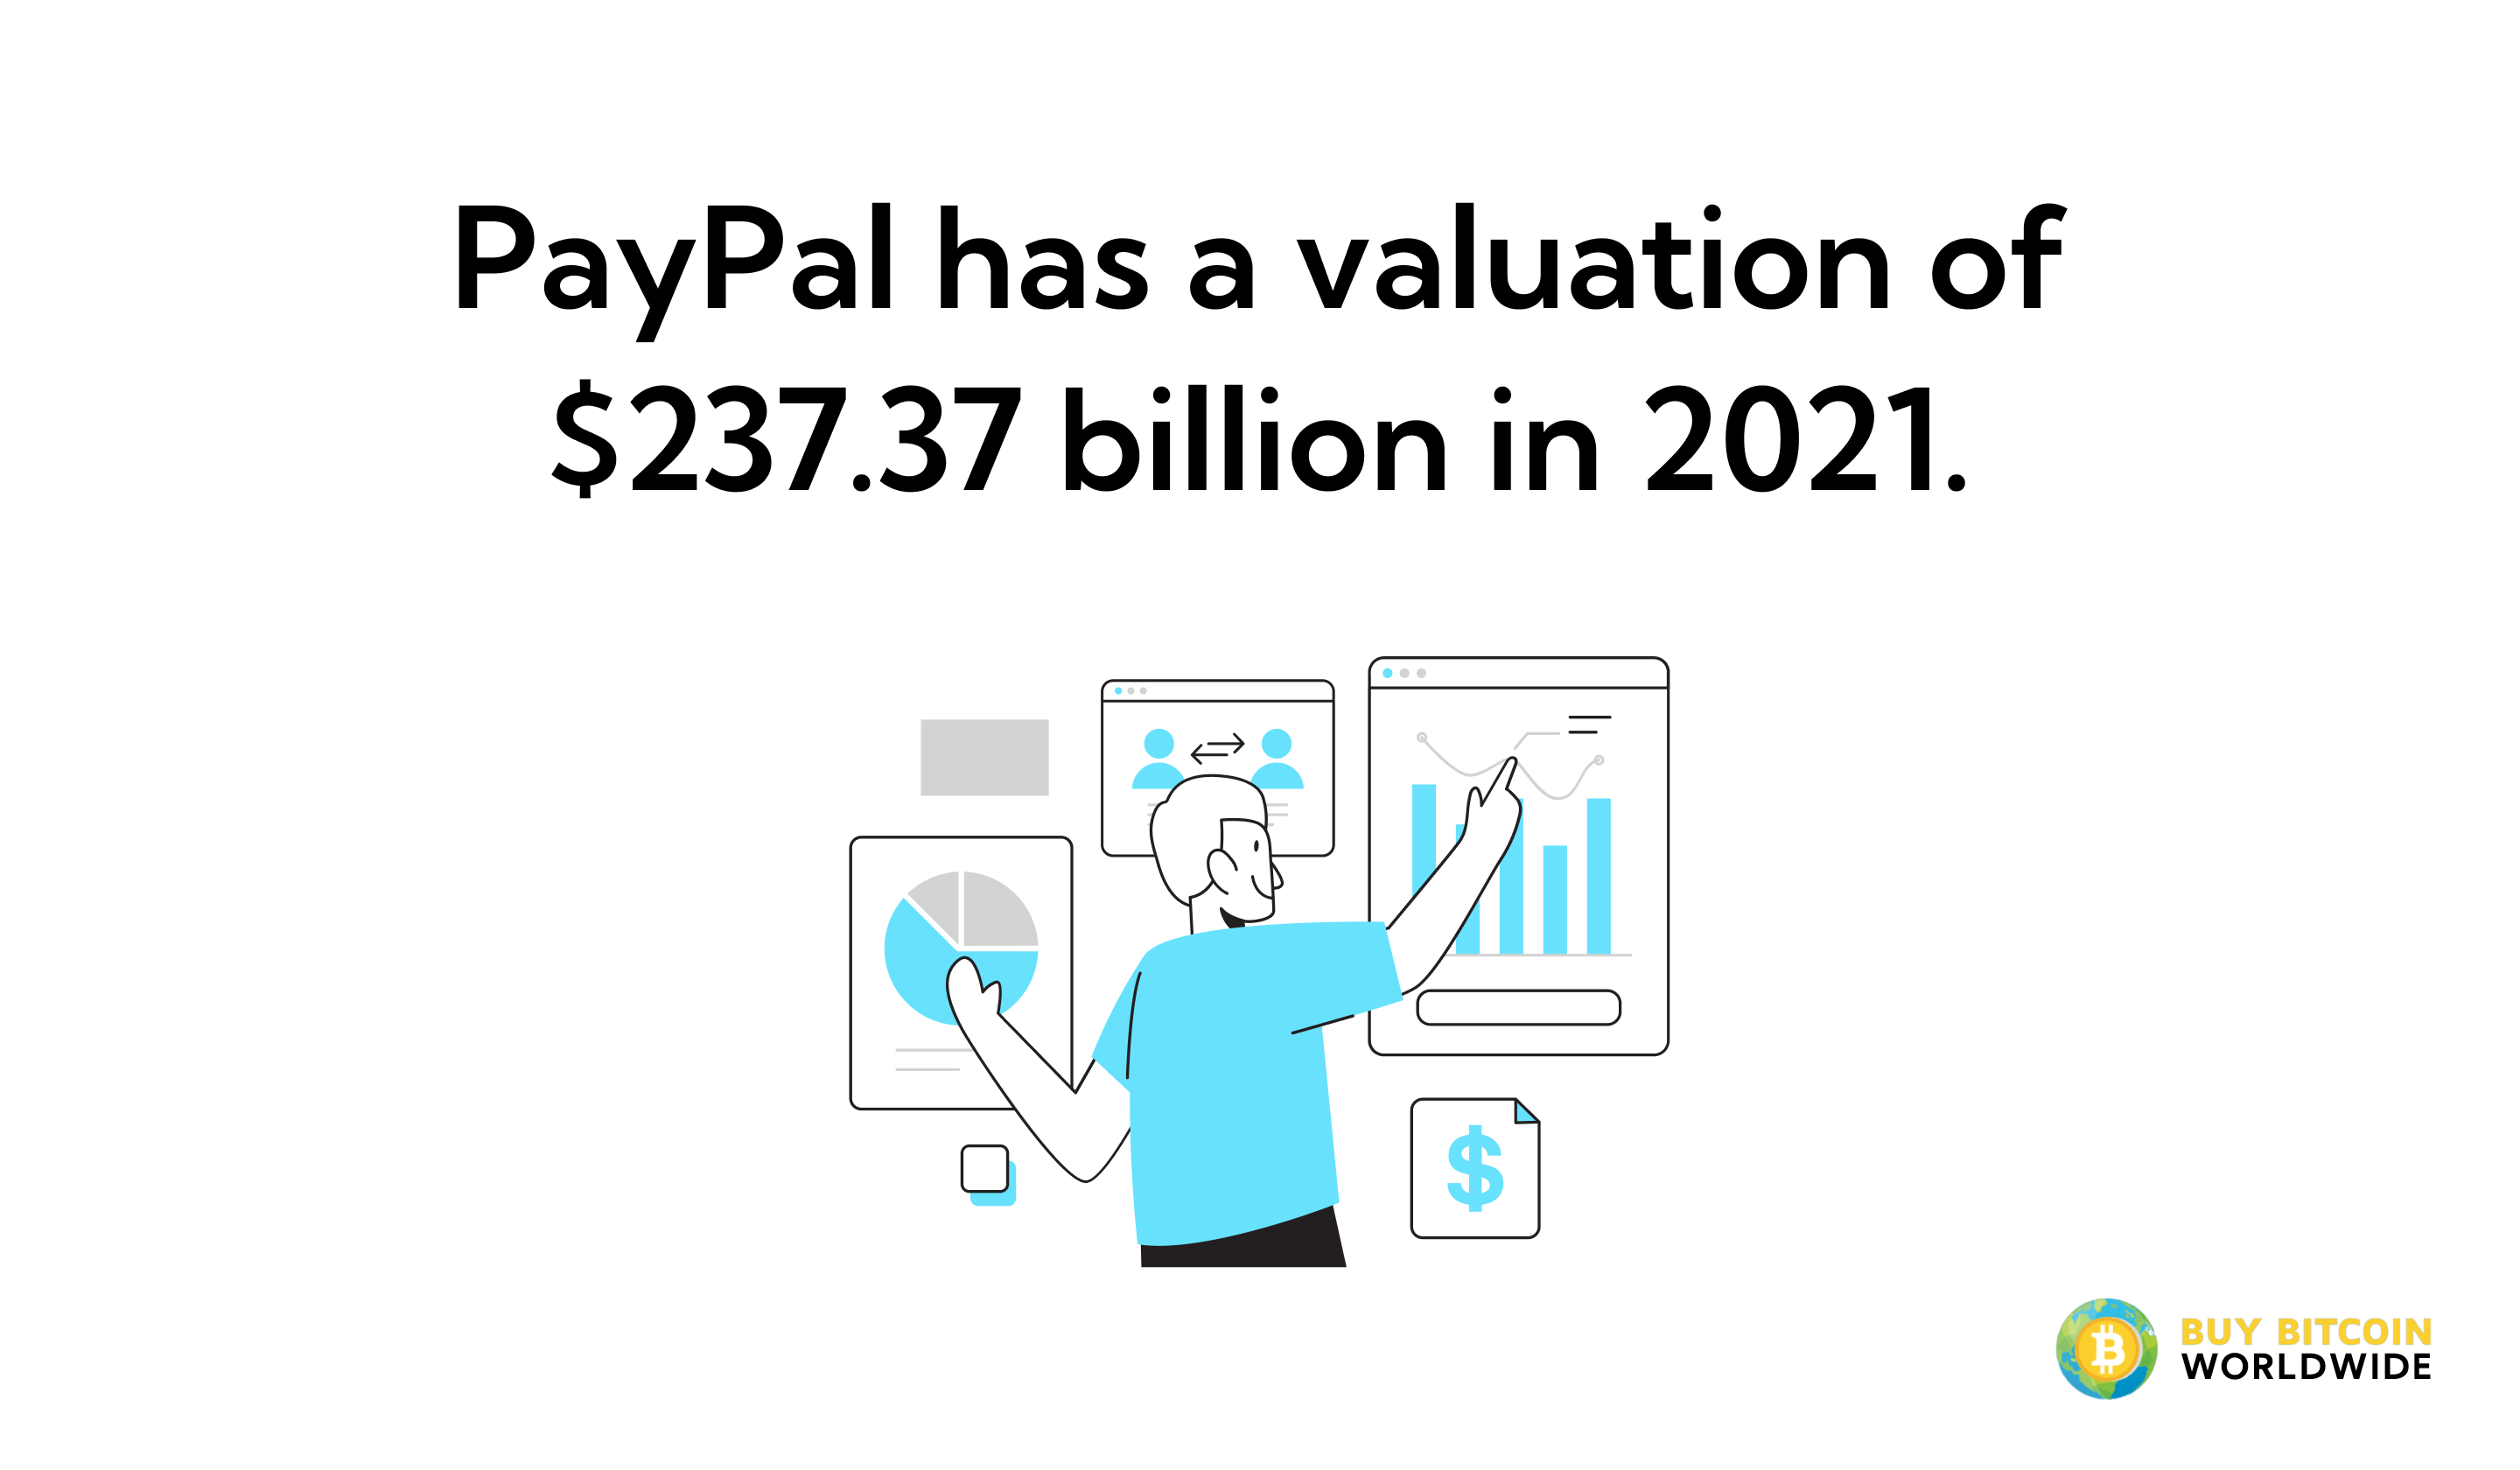 paypal has a $237.37 billion valuation in 2021